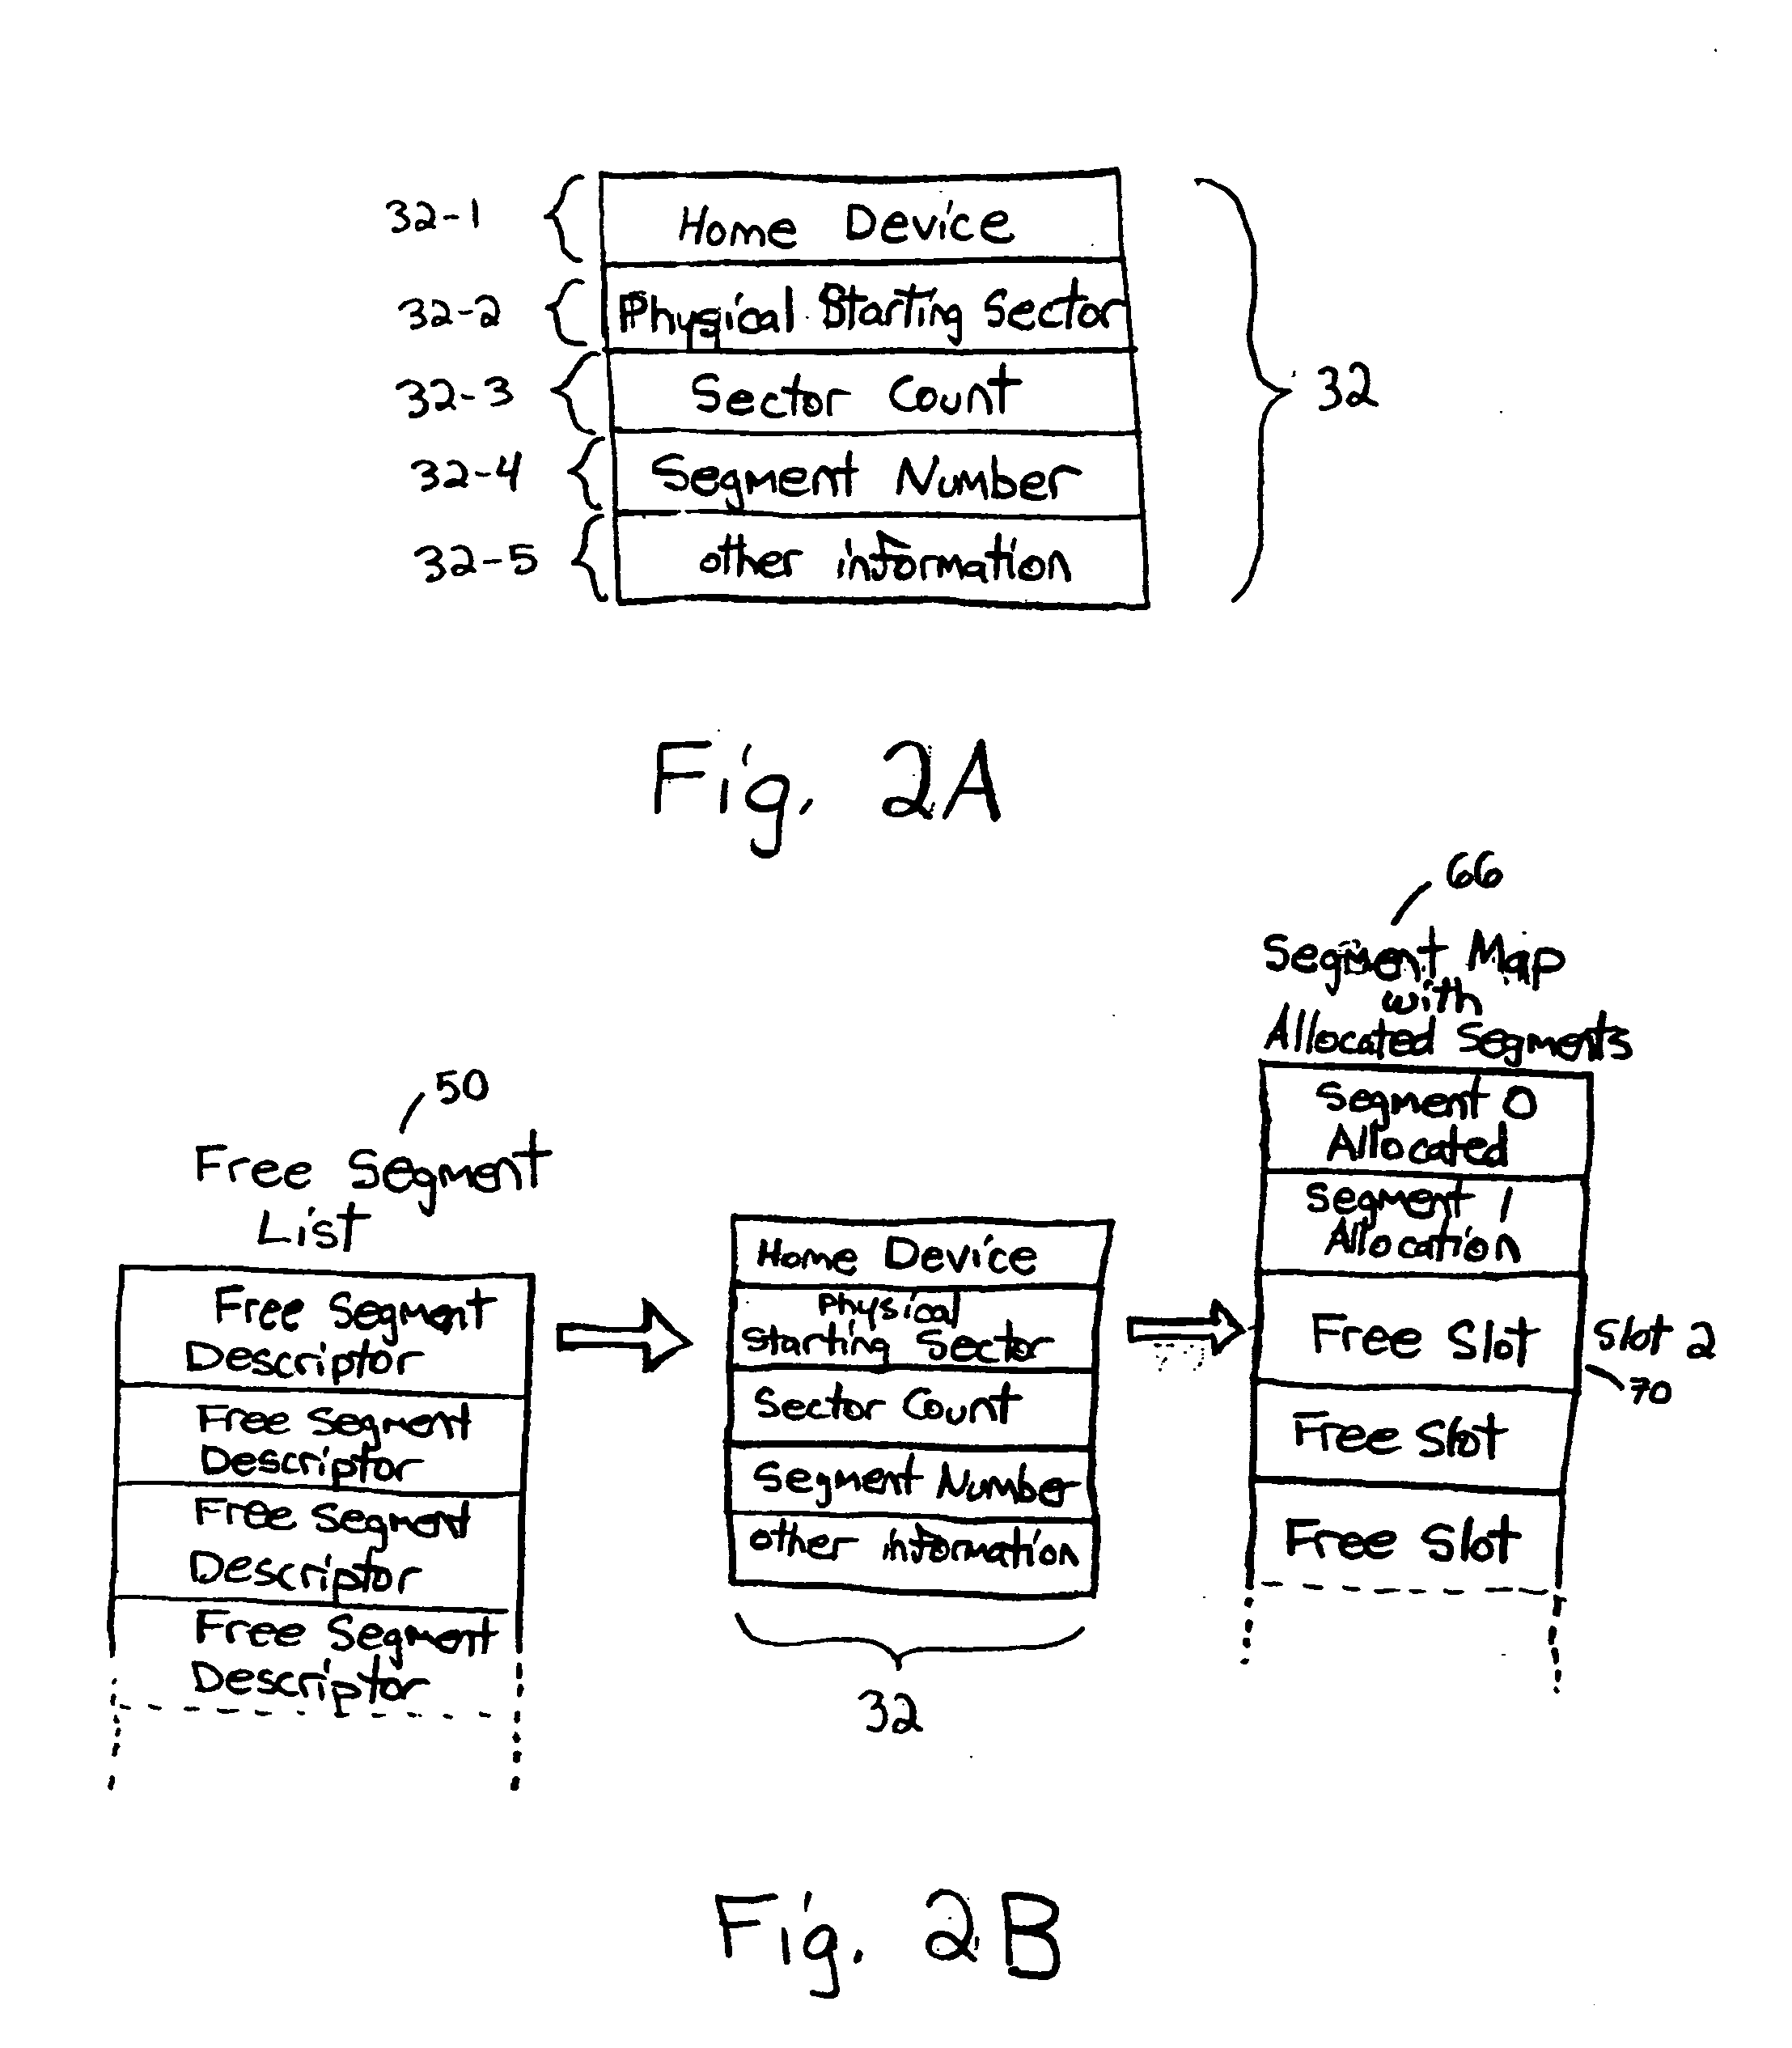 Method and system for storing data